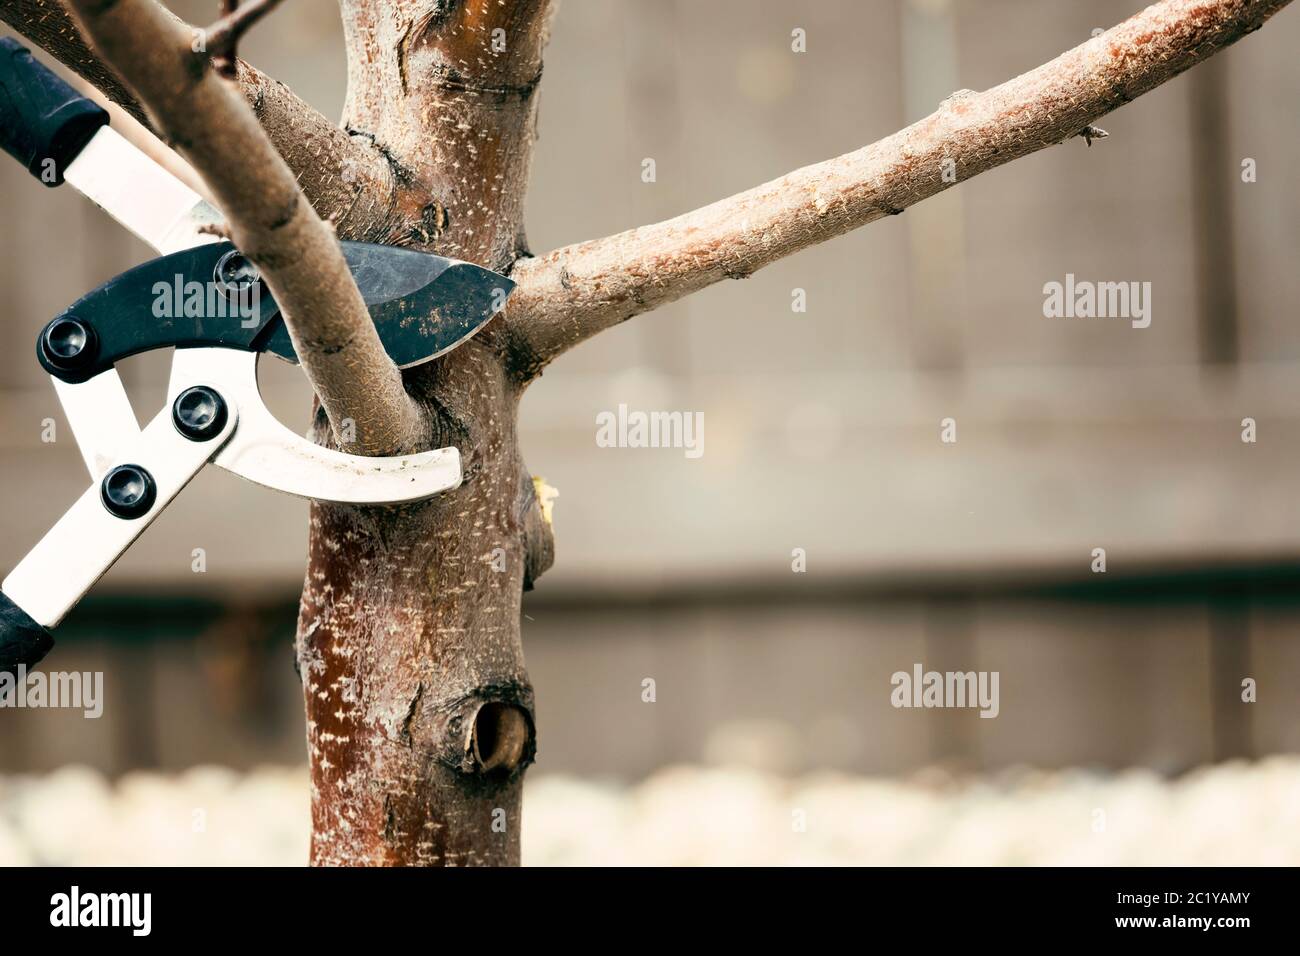 Pruning tree branches early in spring Stock Photo